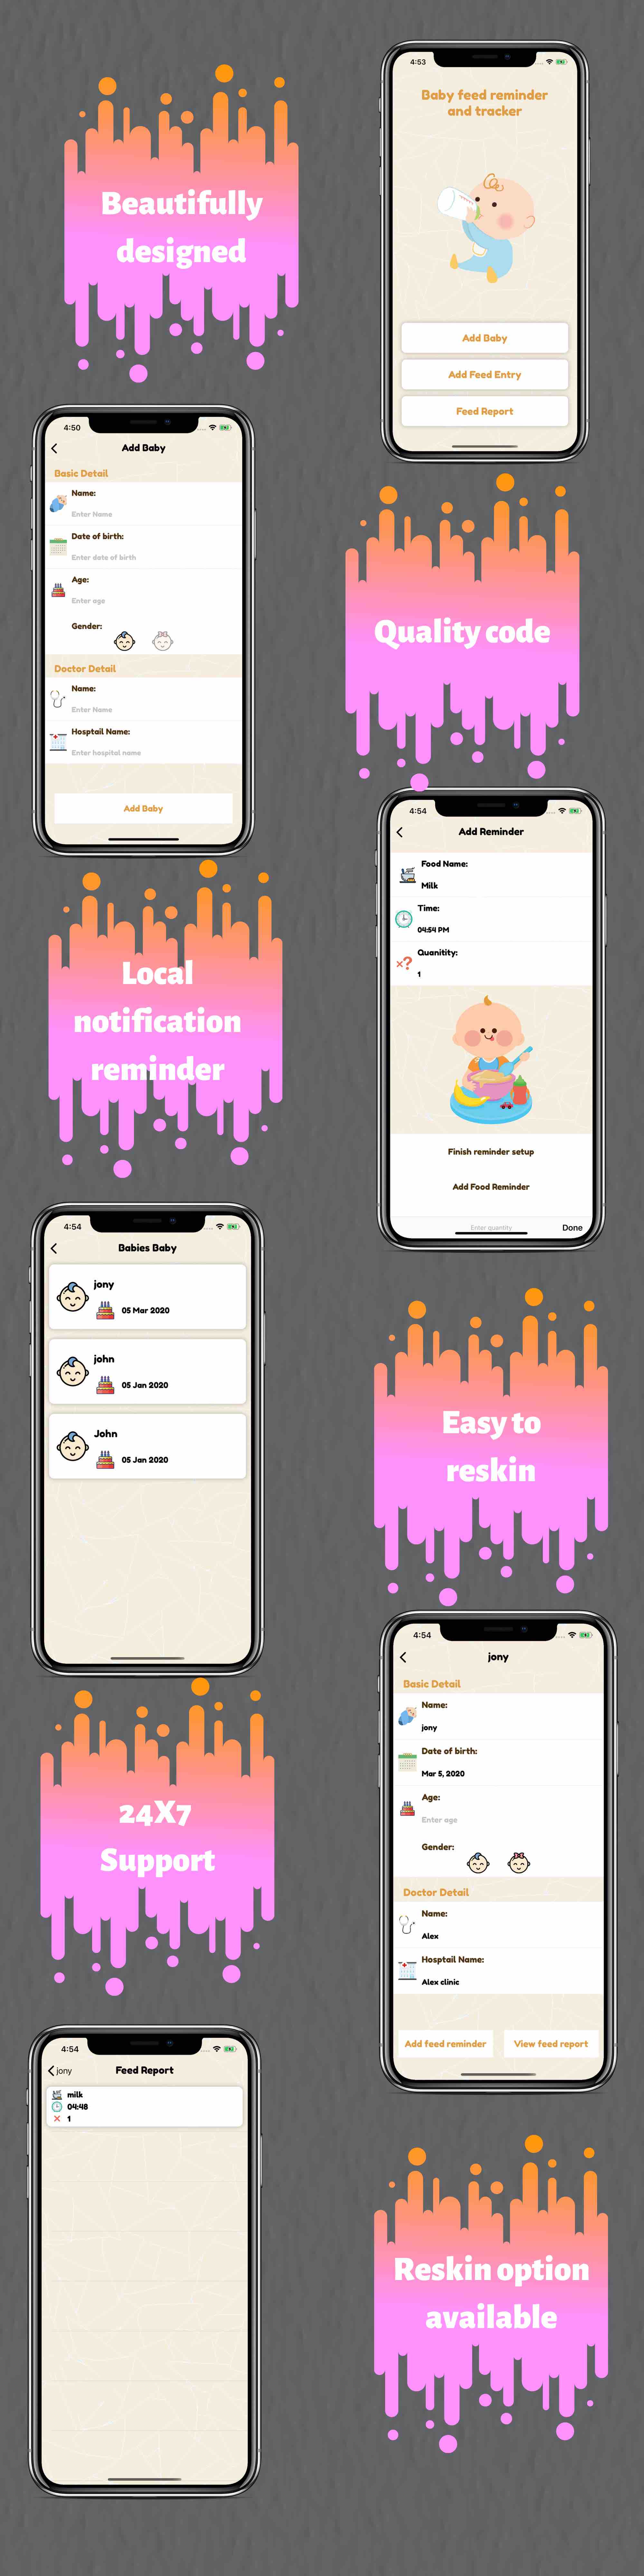 Baby feed tracker and reminder - 3